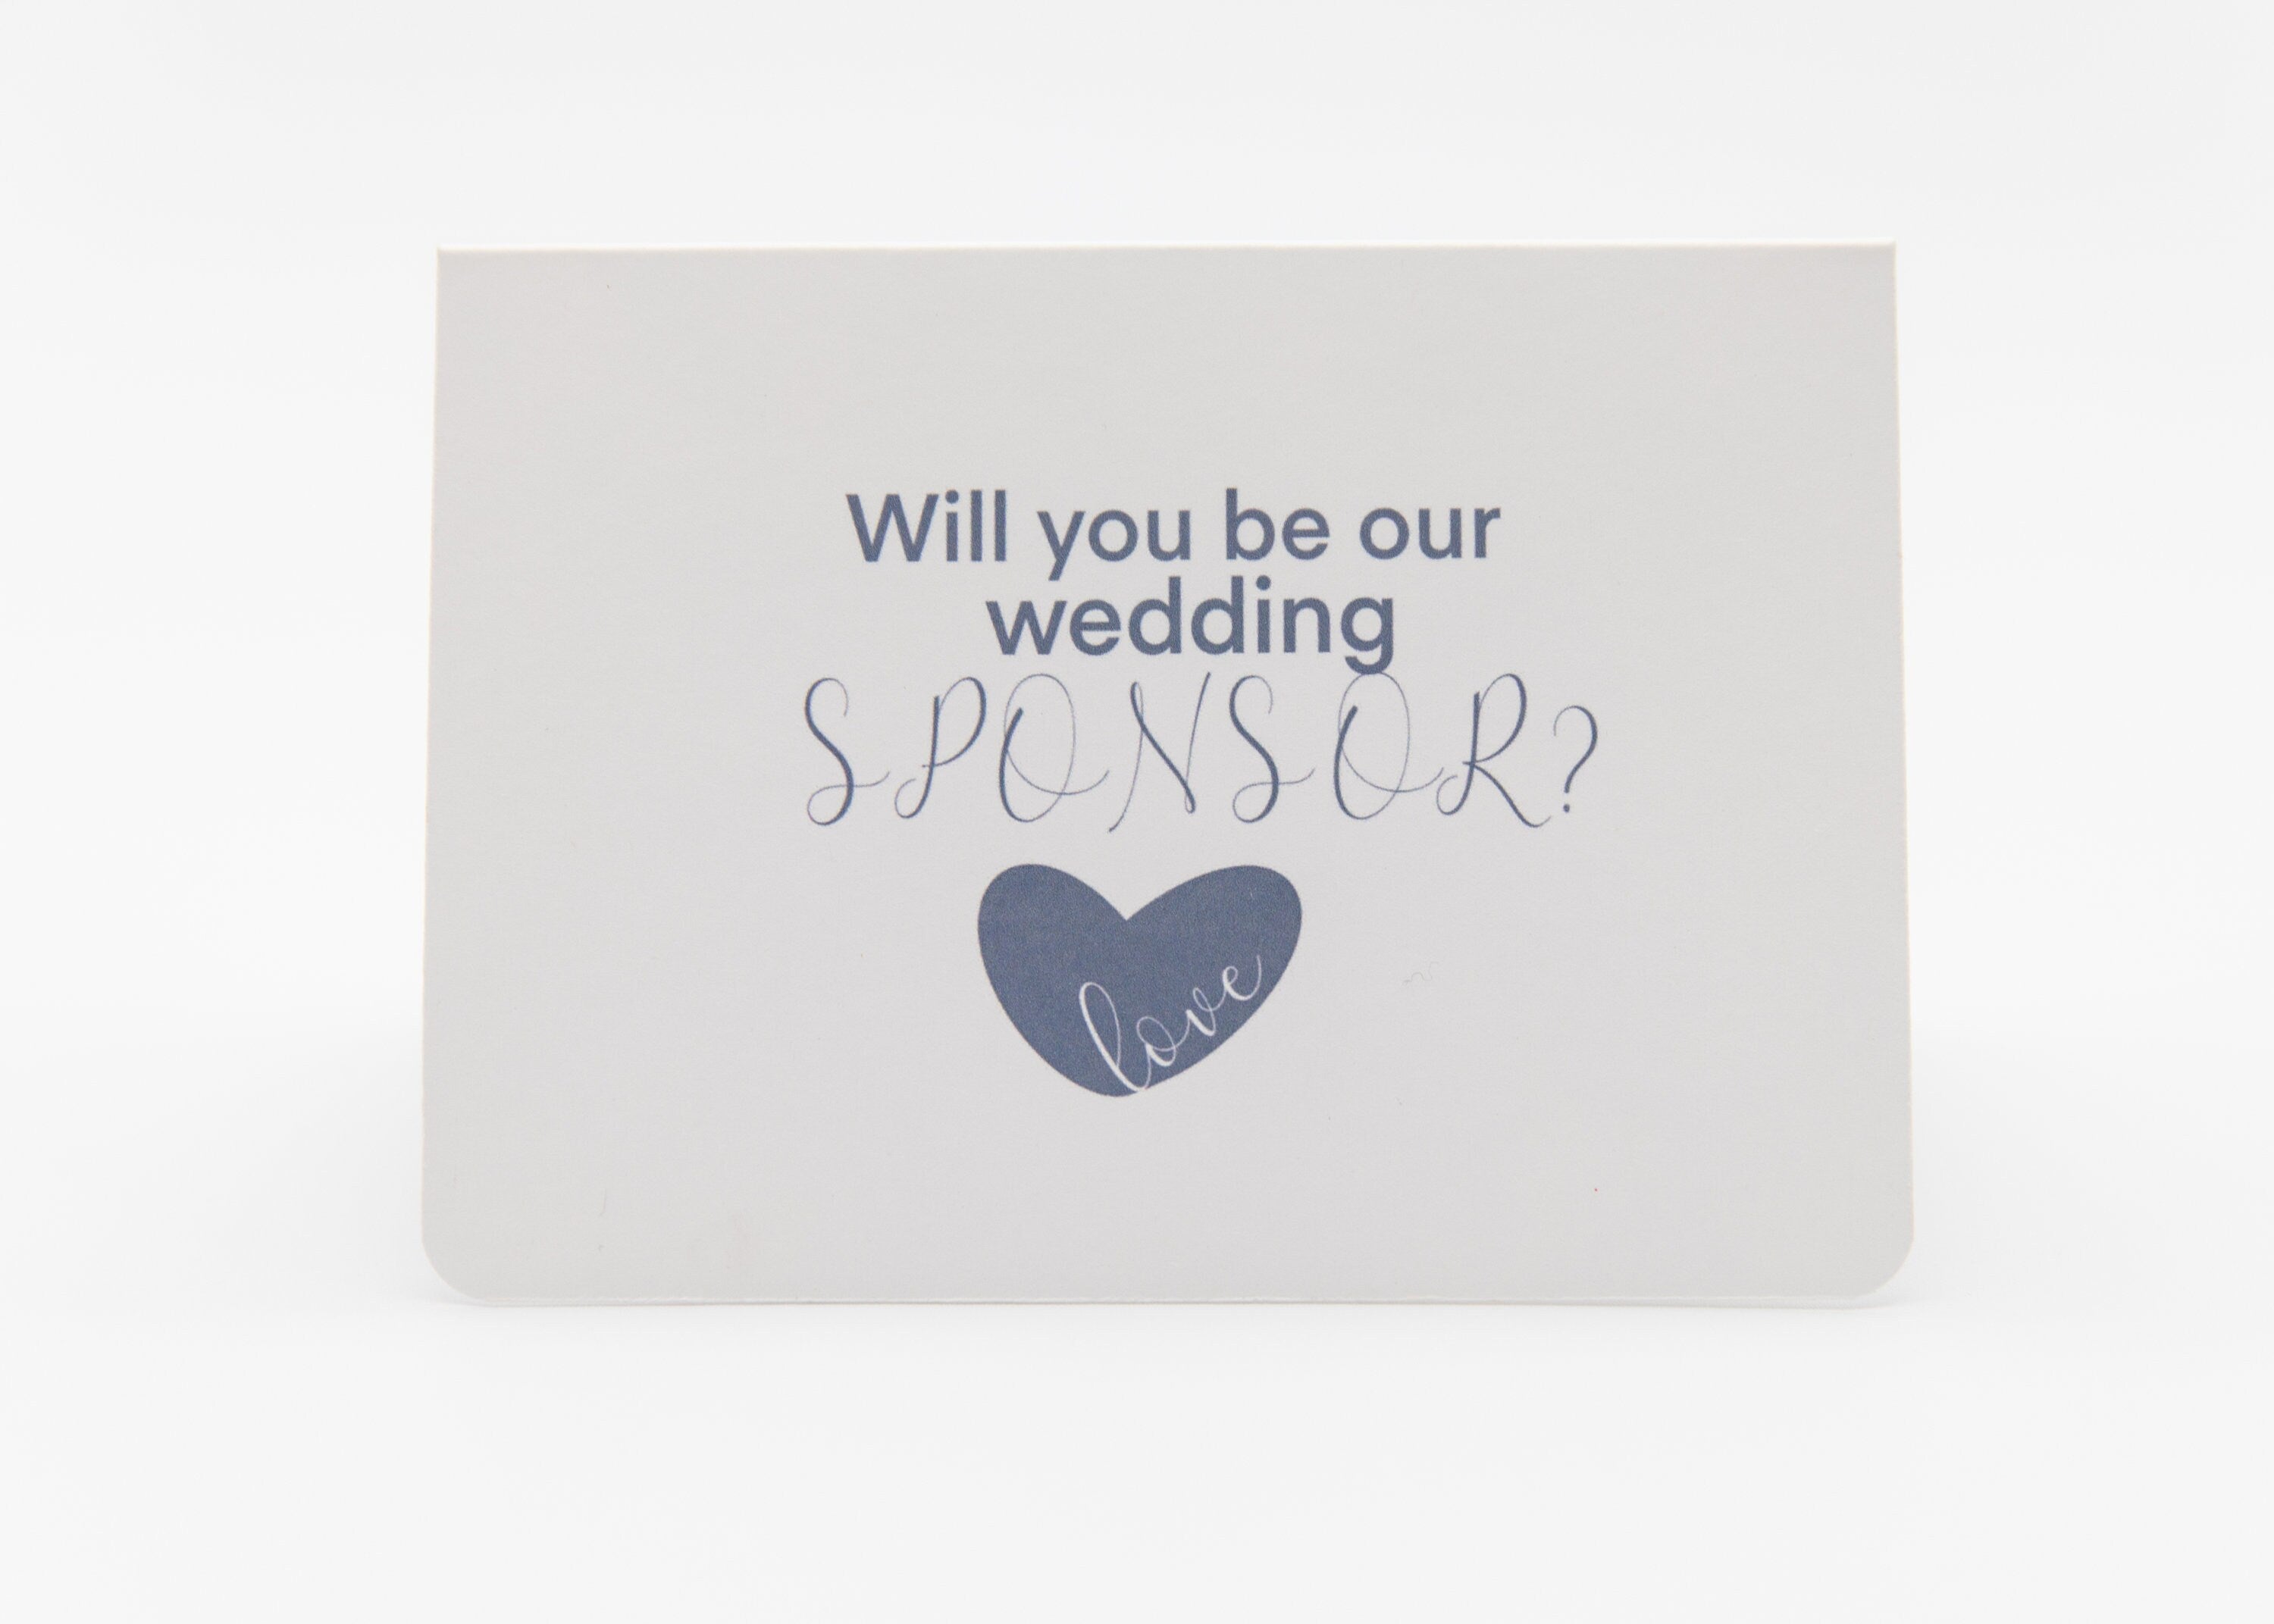 Mie Makes Will You Be Our Wedding Sponsor Greeting Card, Homemade Greeting Card, Filipino American Wedding, Maligayang Kasal, Wedding Sponsor Card